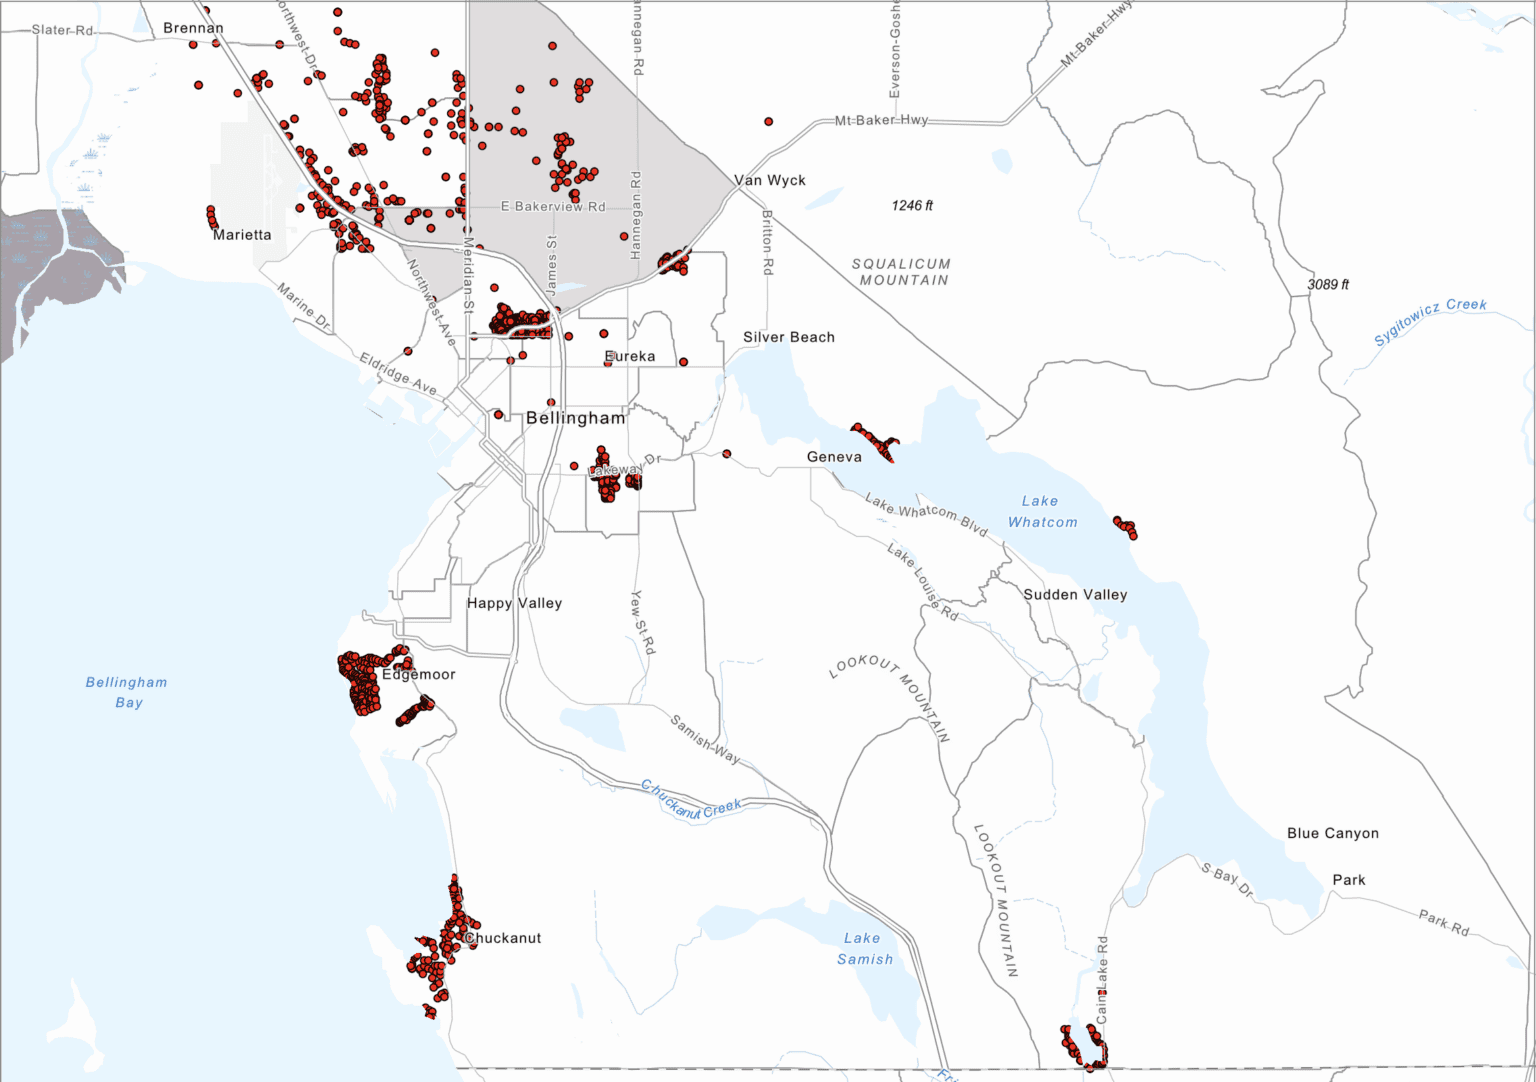 This section of a preliminary map shows the properties in and near Bellingham that were restricted by racial covenants. A University of Washington study has found more than 1